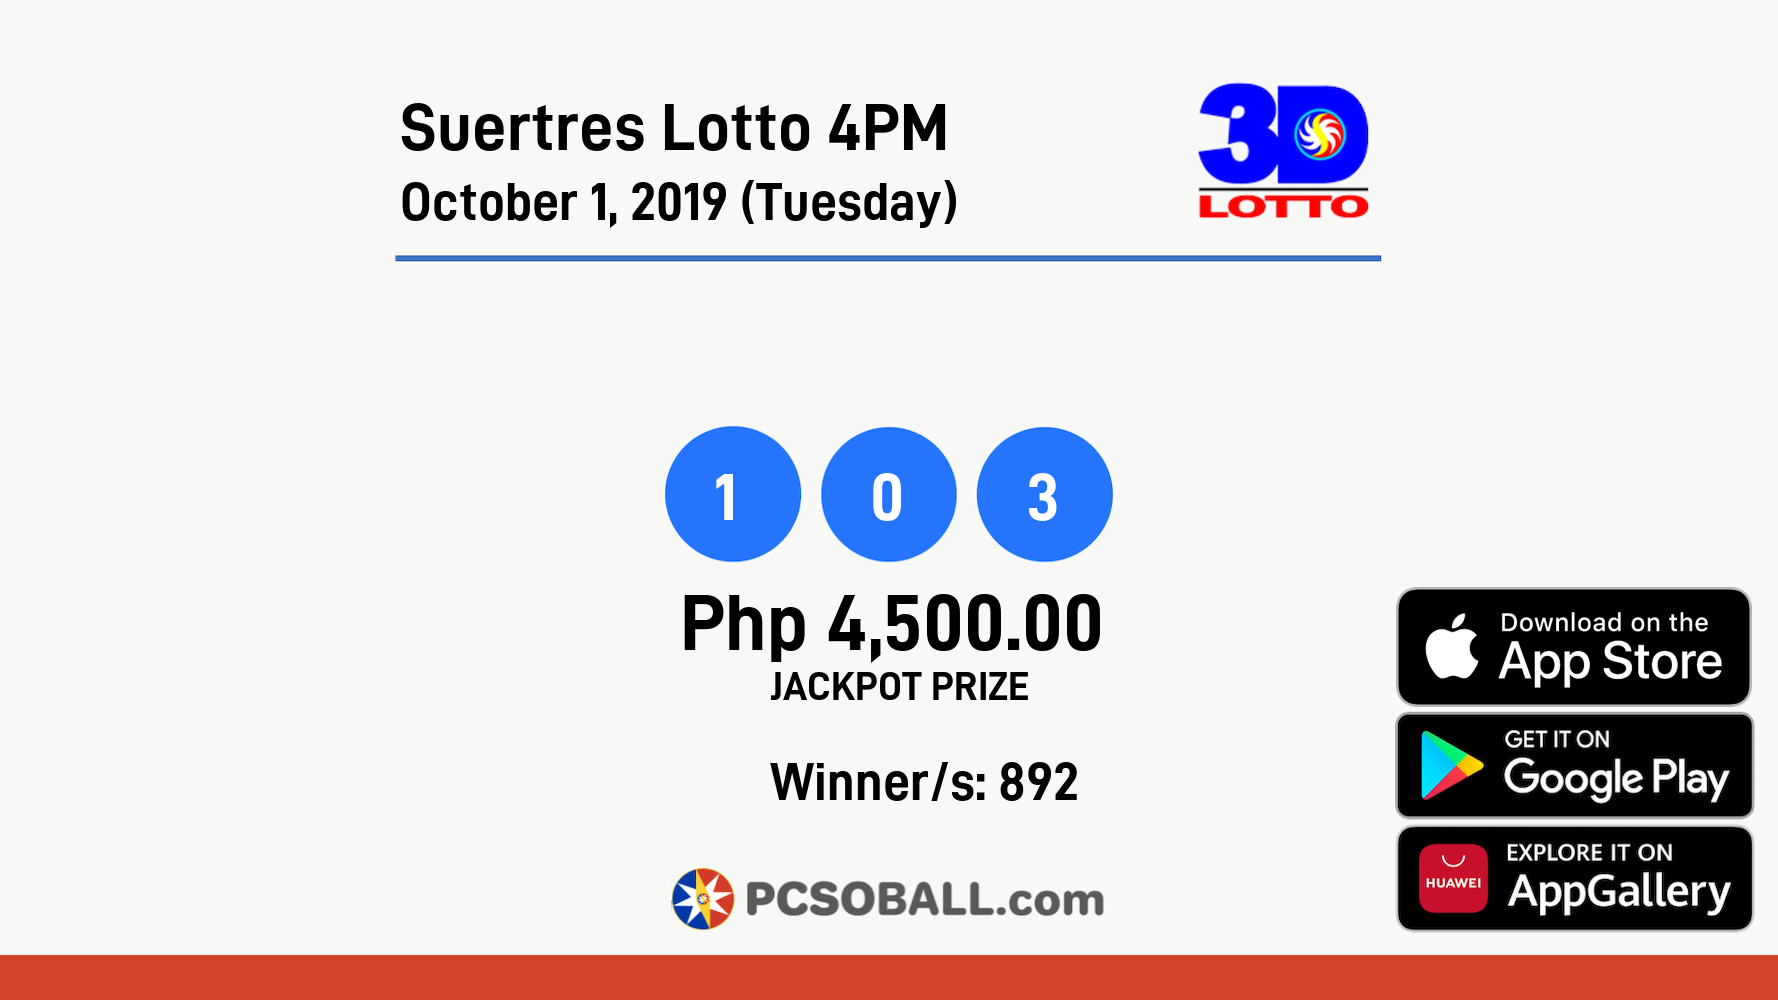 Suertres Lotto 4PM October 1, 2019 (Tuesday) Result